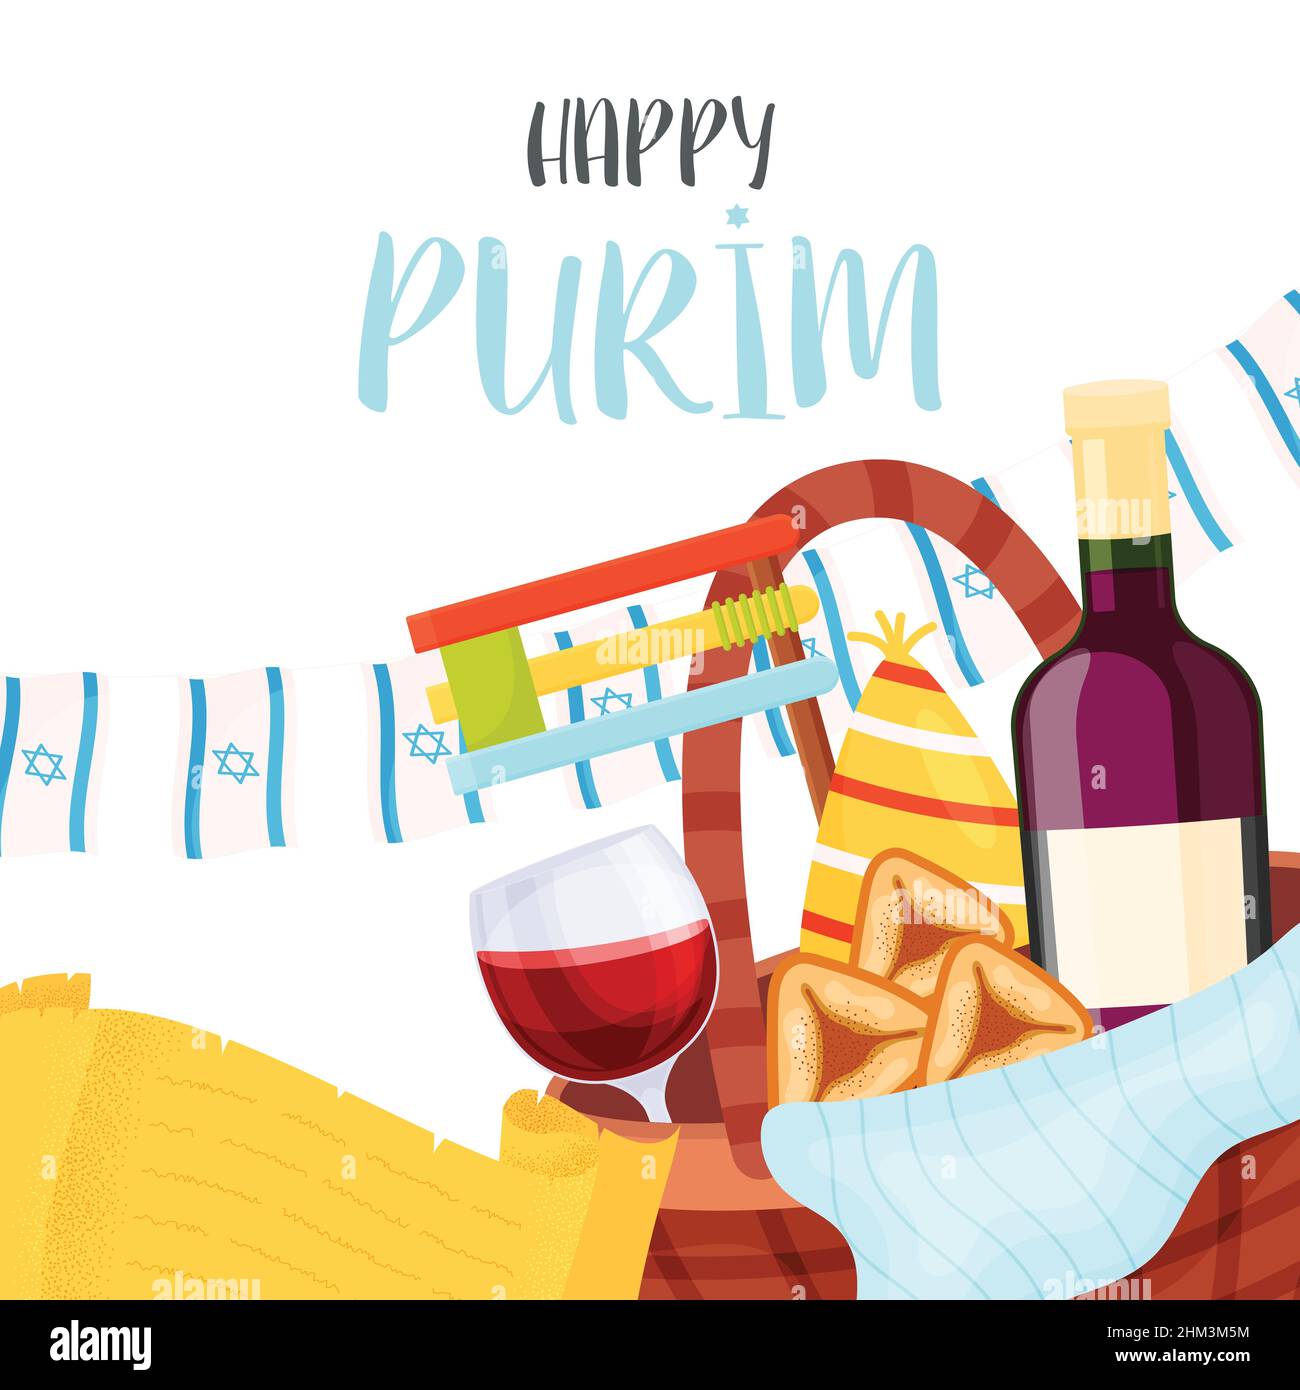 Happy Purim day greeting card. Vector illustration Stock Vector